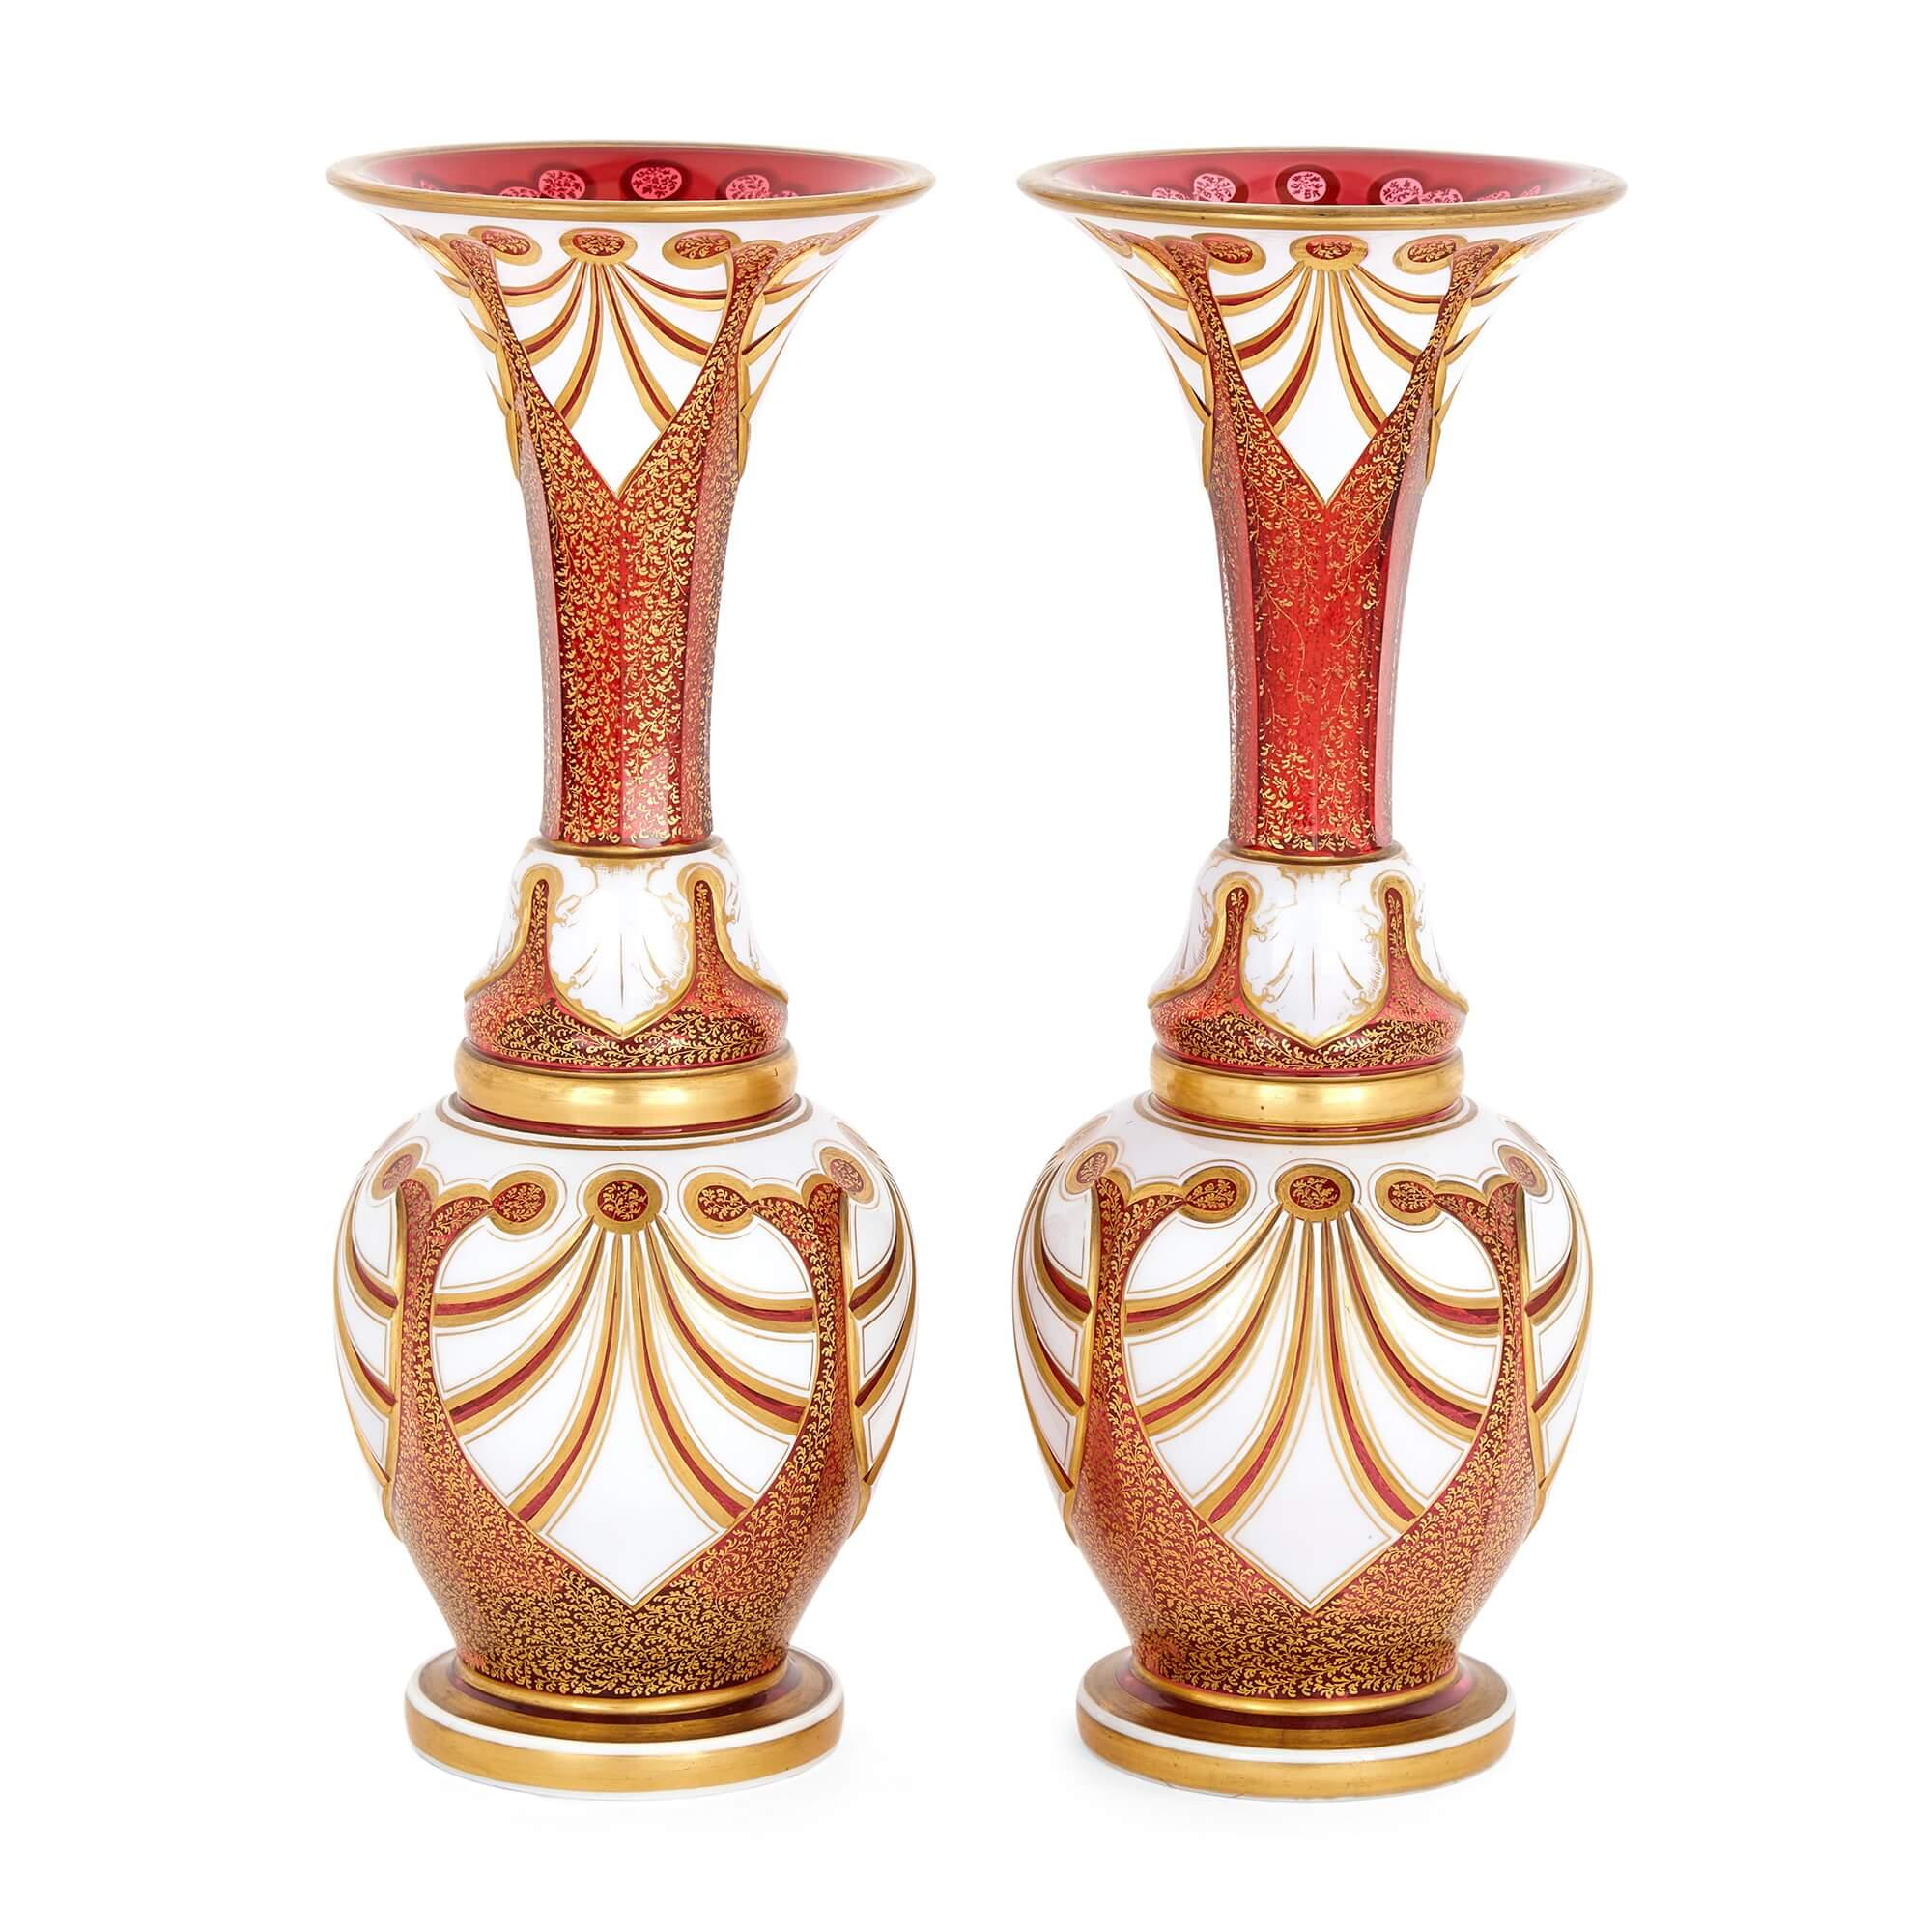 Pair of antique Bohemian ruby glass and parcel gilt vases 
Bohemian, Late 19th Century 
Height 38cm, diameter 14.5cm

Manufactured in Bohemia (modern-day Czech Republic), the renowned centre of glass production, this pair of vases is of baluster